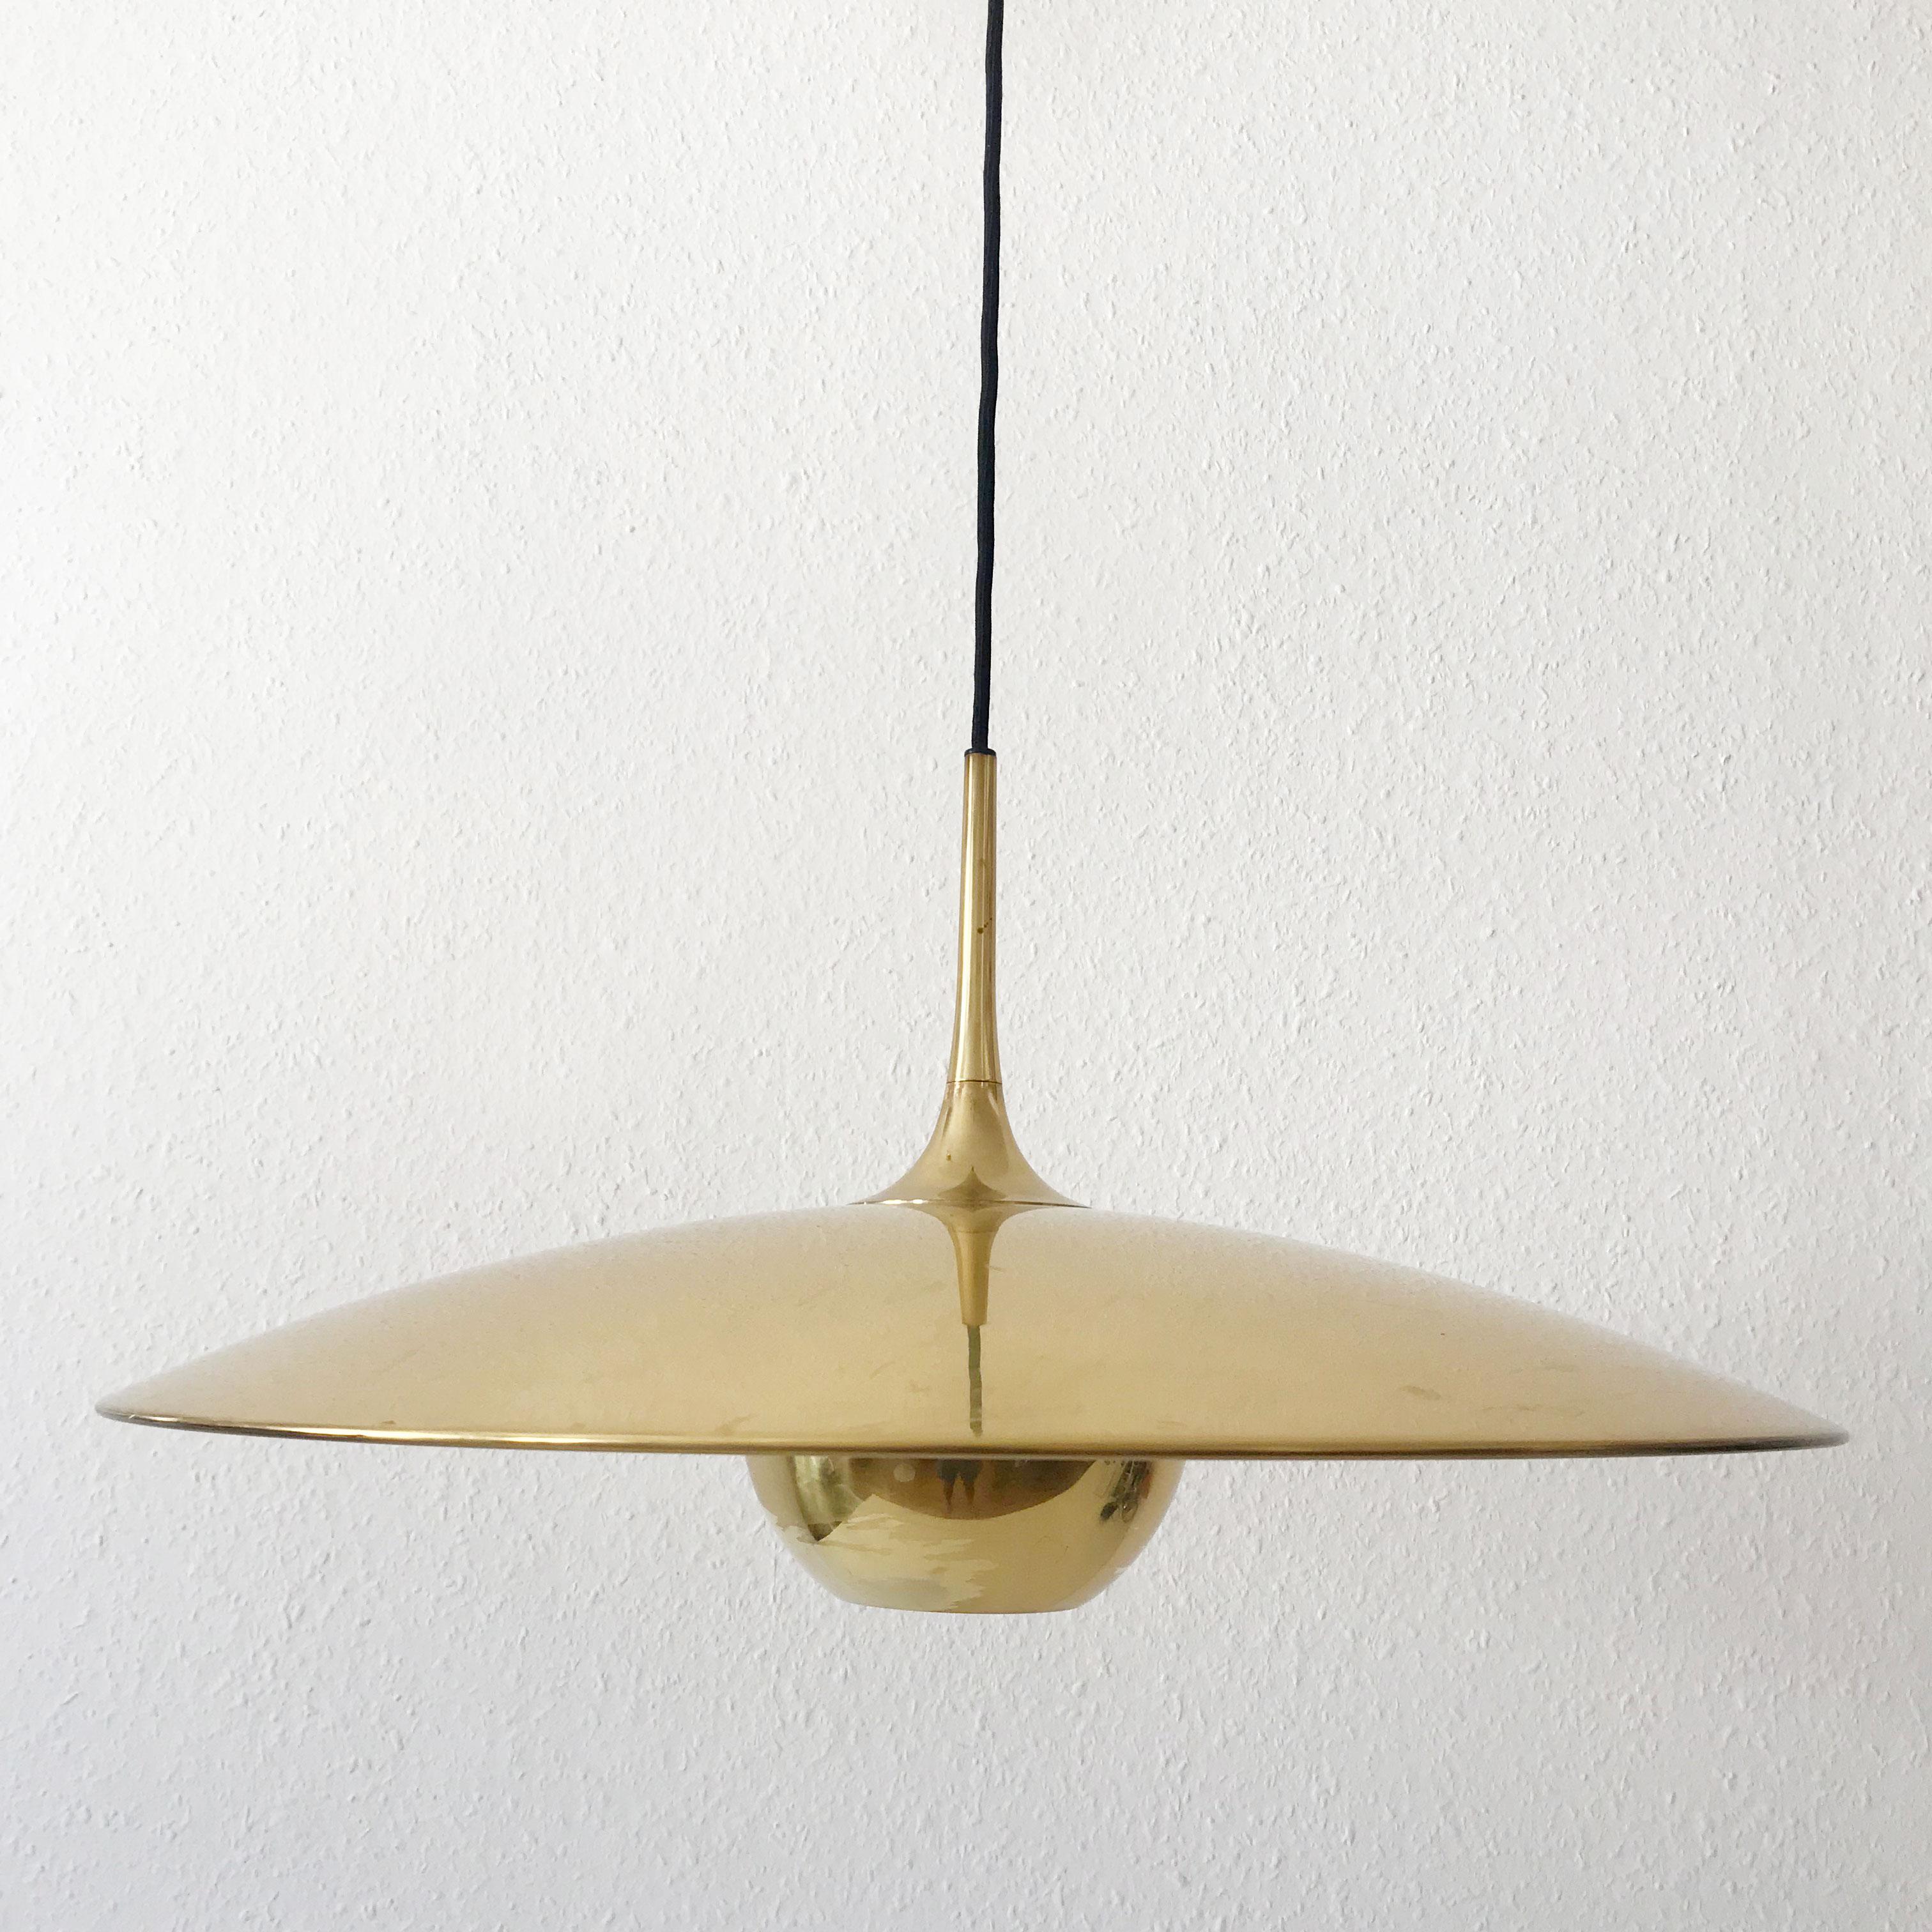 Counter Balance Pendant Lamp Onos 55 by Florian Schulz, 1980s, Germany 10